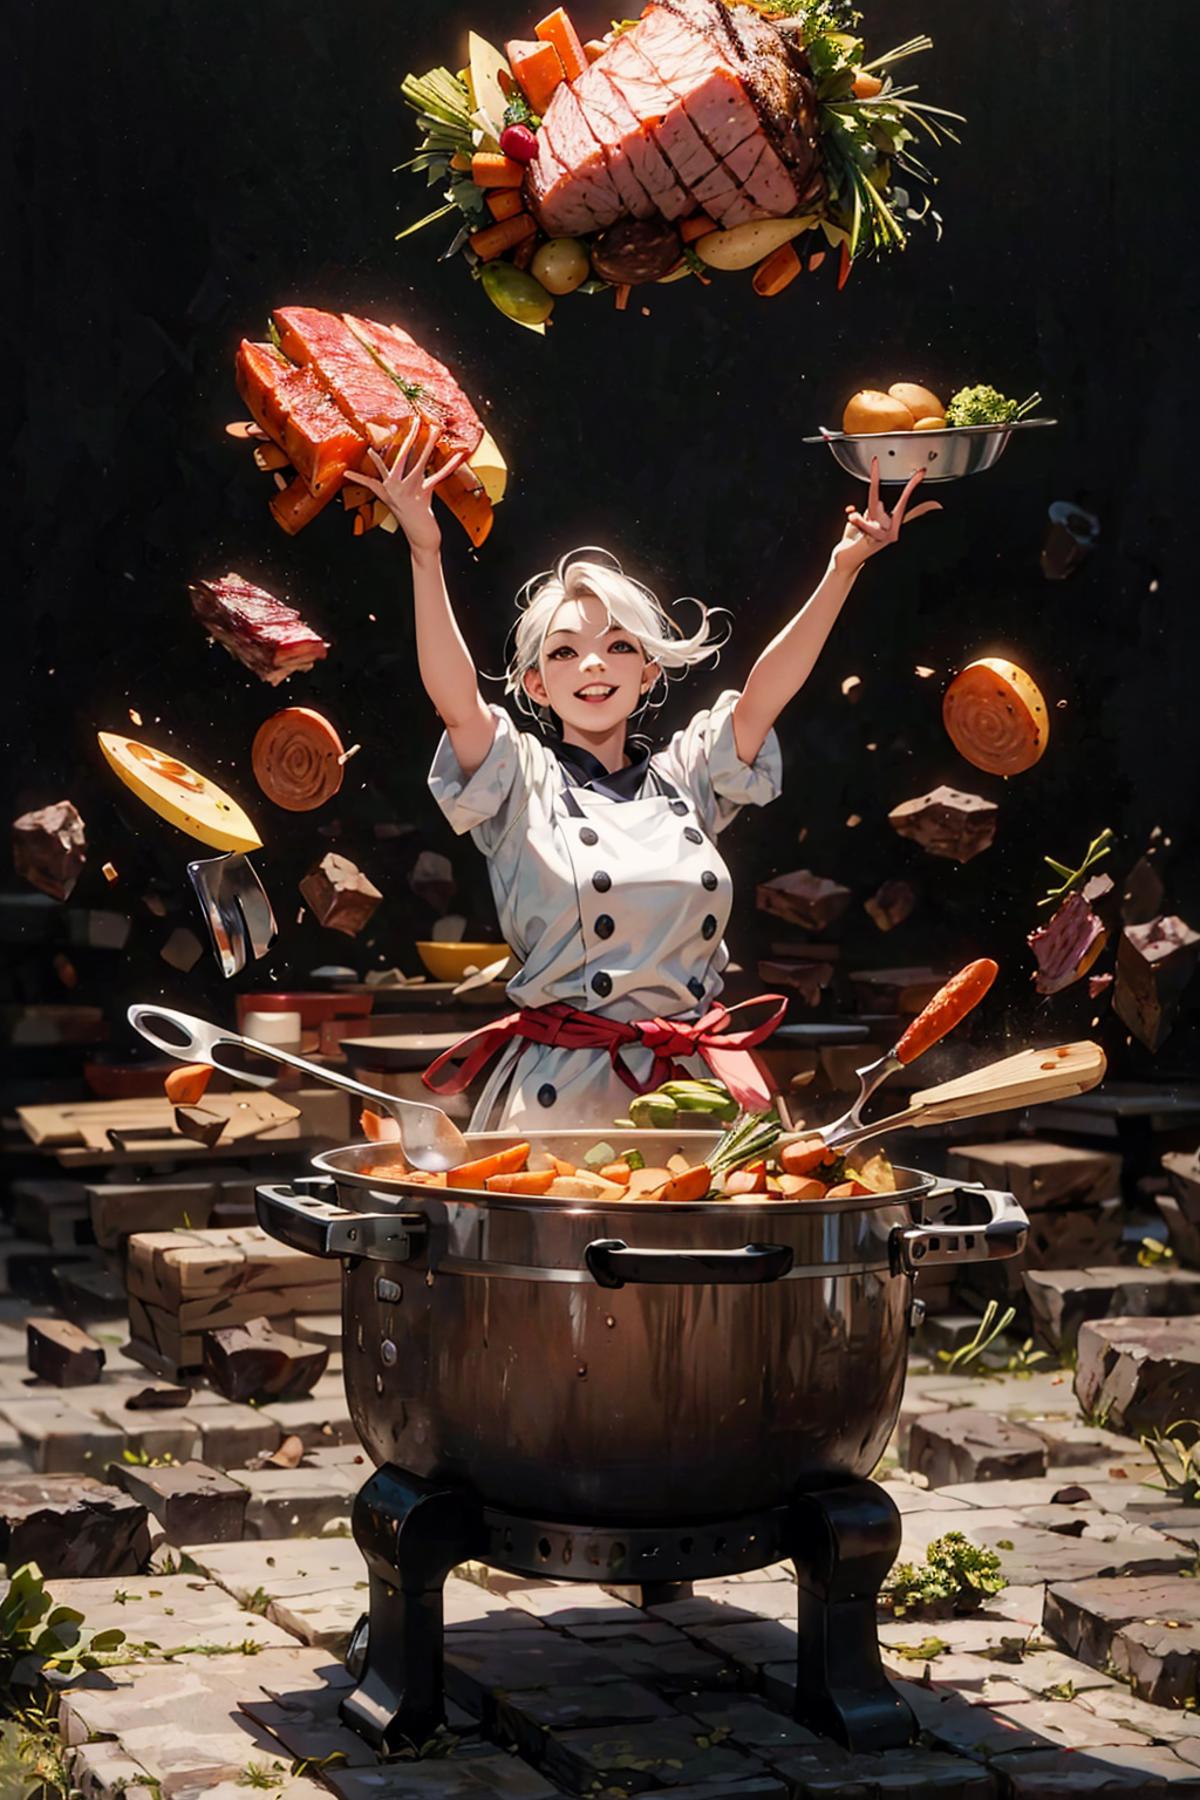 A woman in a chef's outfit preparing a meal with various ingredients and utensils.